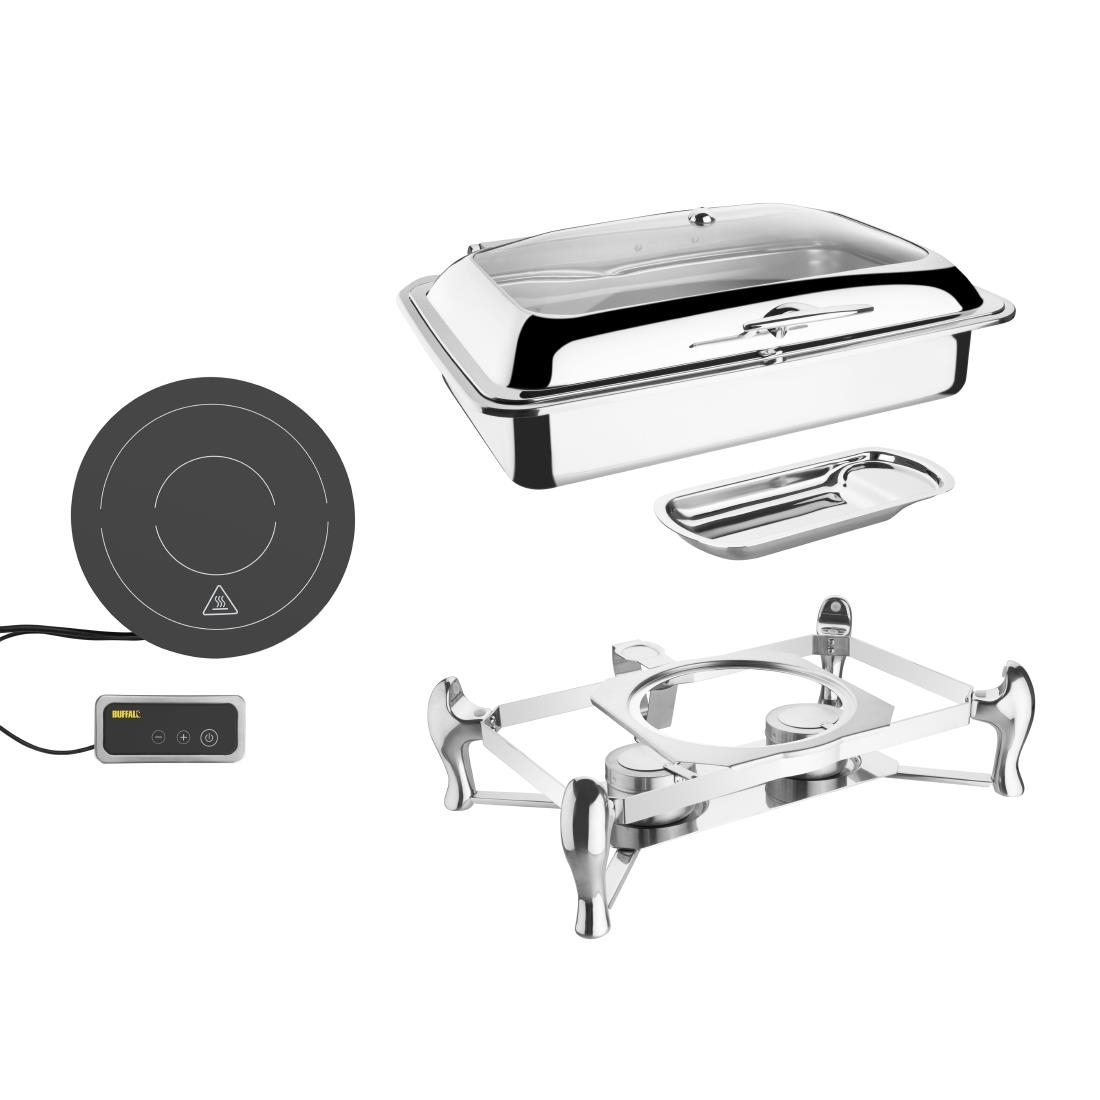 Olympia SA648 1/1 Induction Chafer - Stand and Induction Heater Set